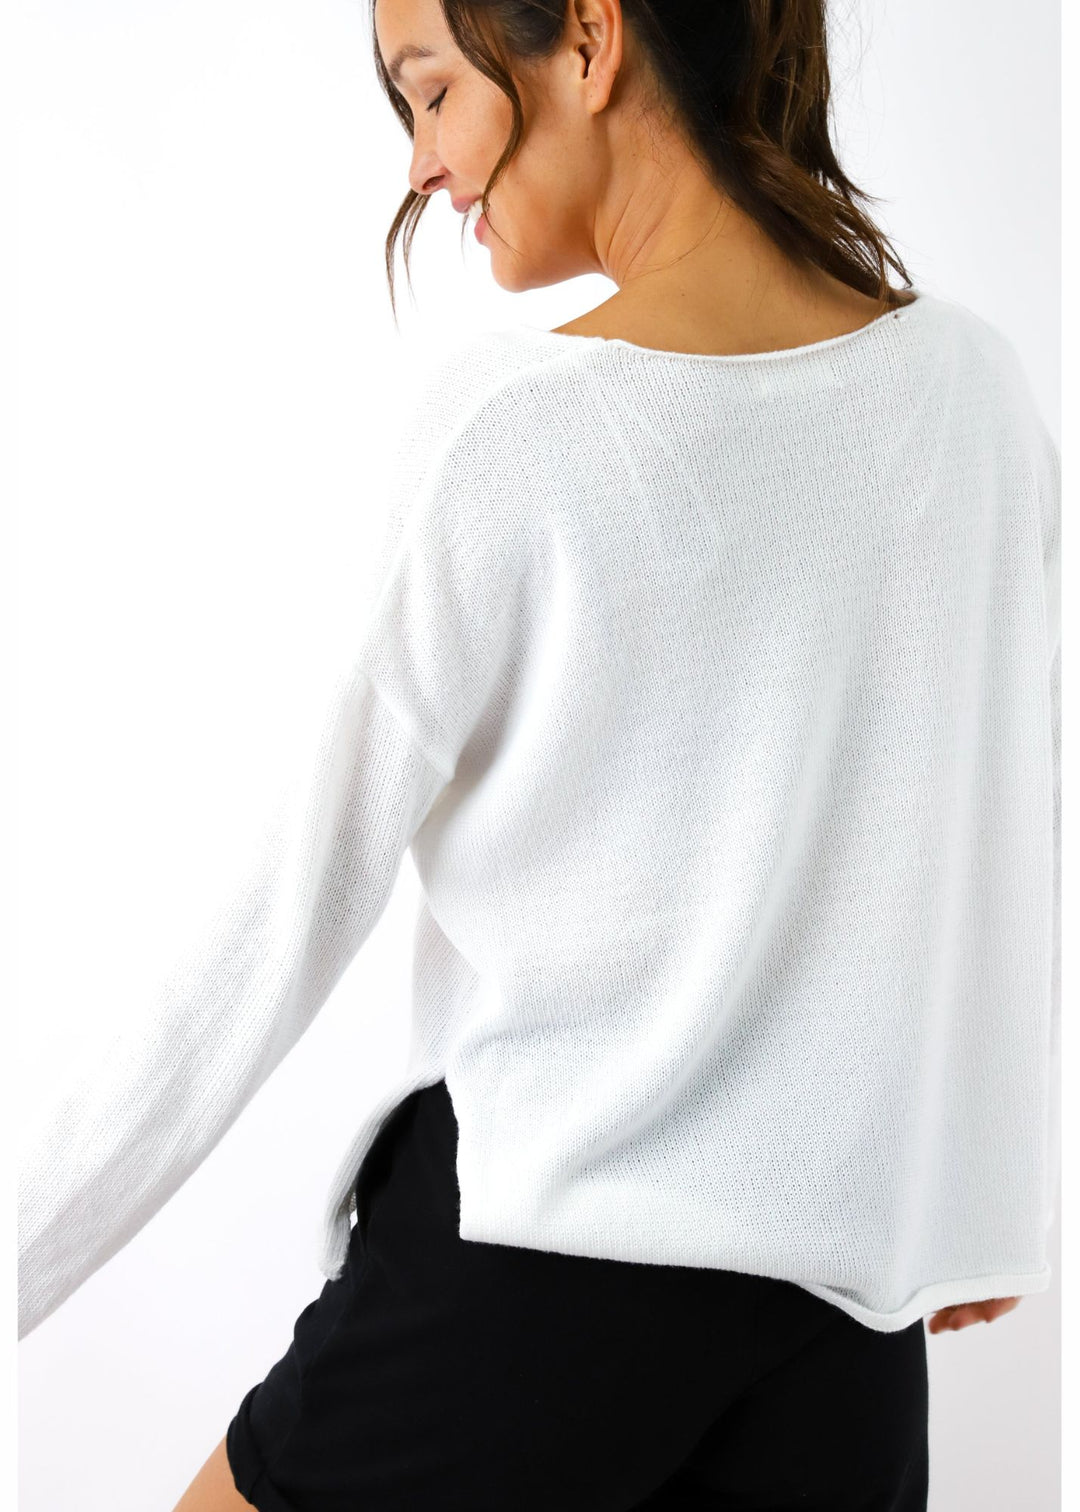 My Cozy Champagne Please Sweater (Ivory)